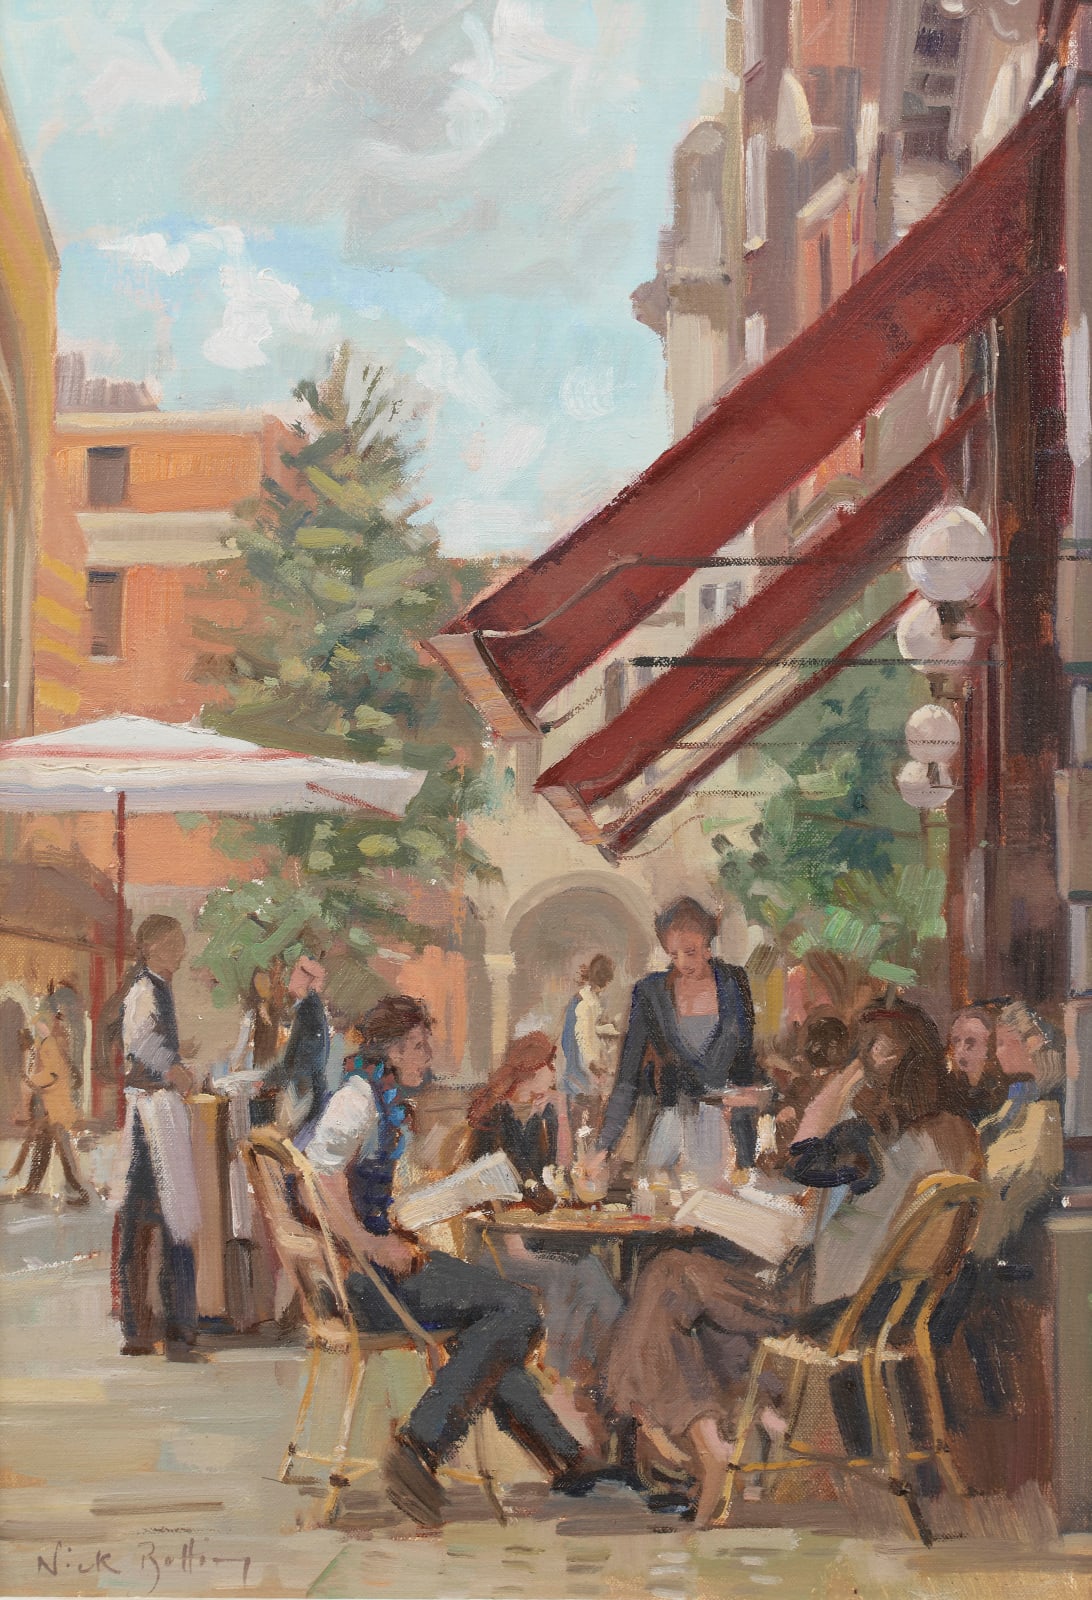 Nick Botting, A Late Breakfast at The Colbert